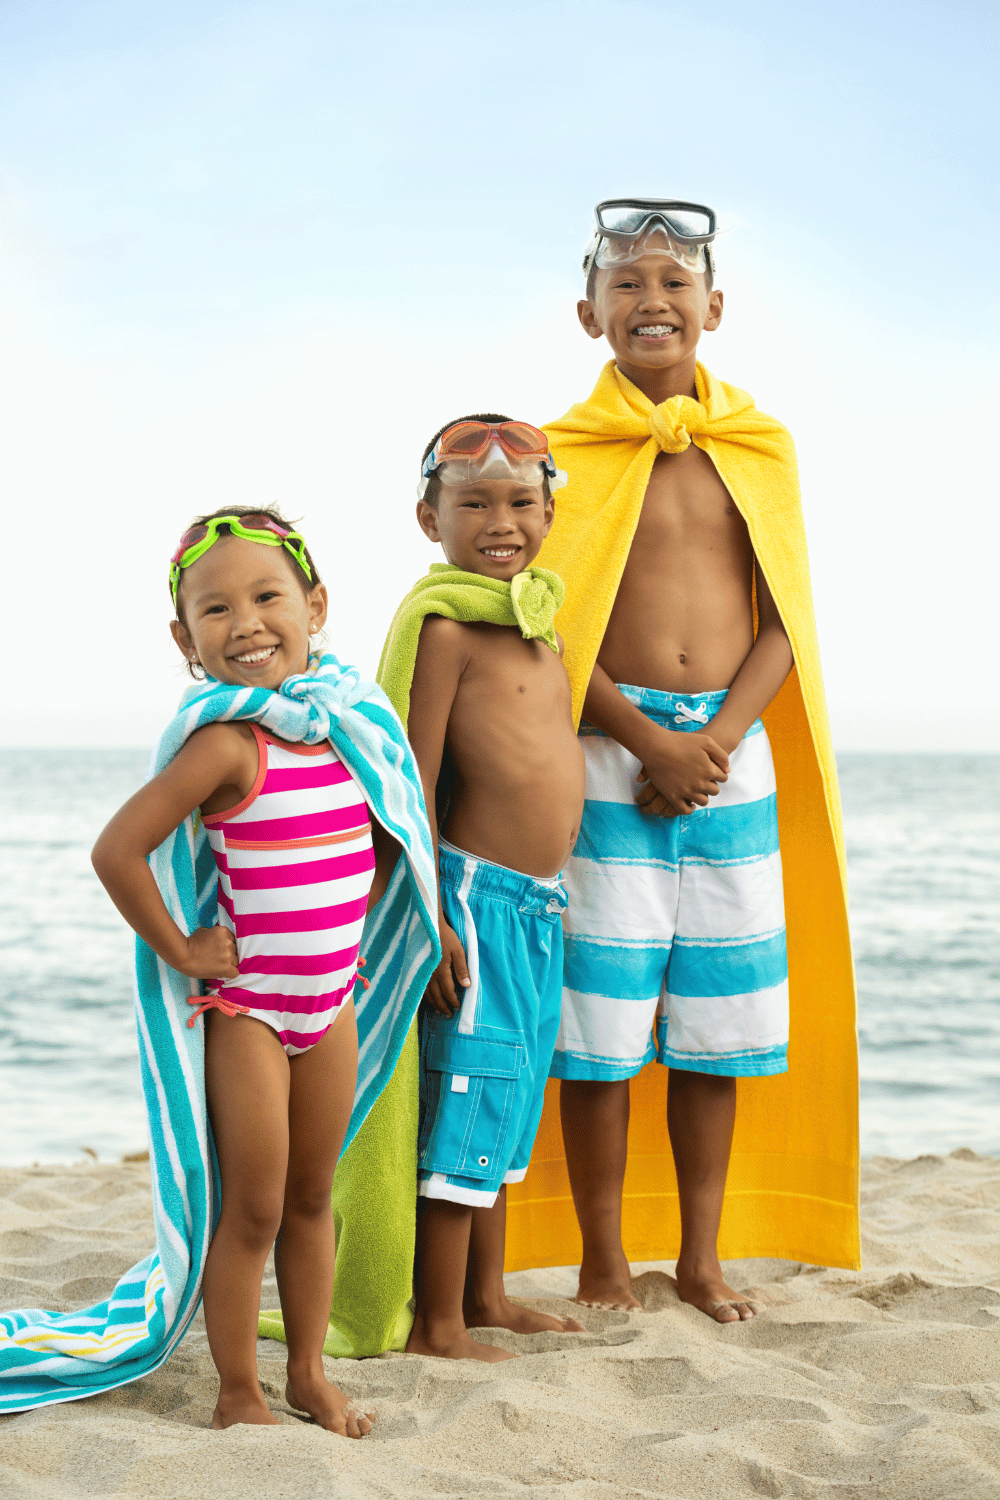 Make a Splash: Tips to Get Vibrant and Playful Swimwear for Kids